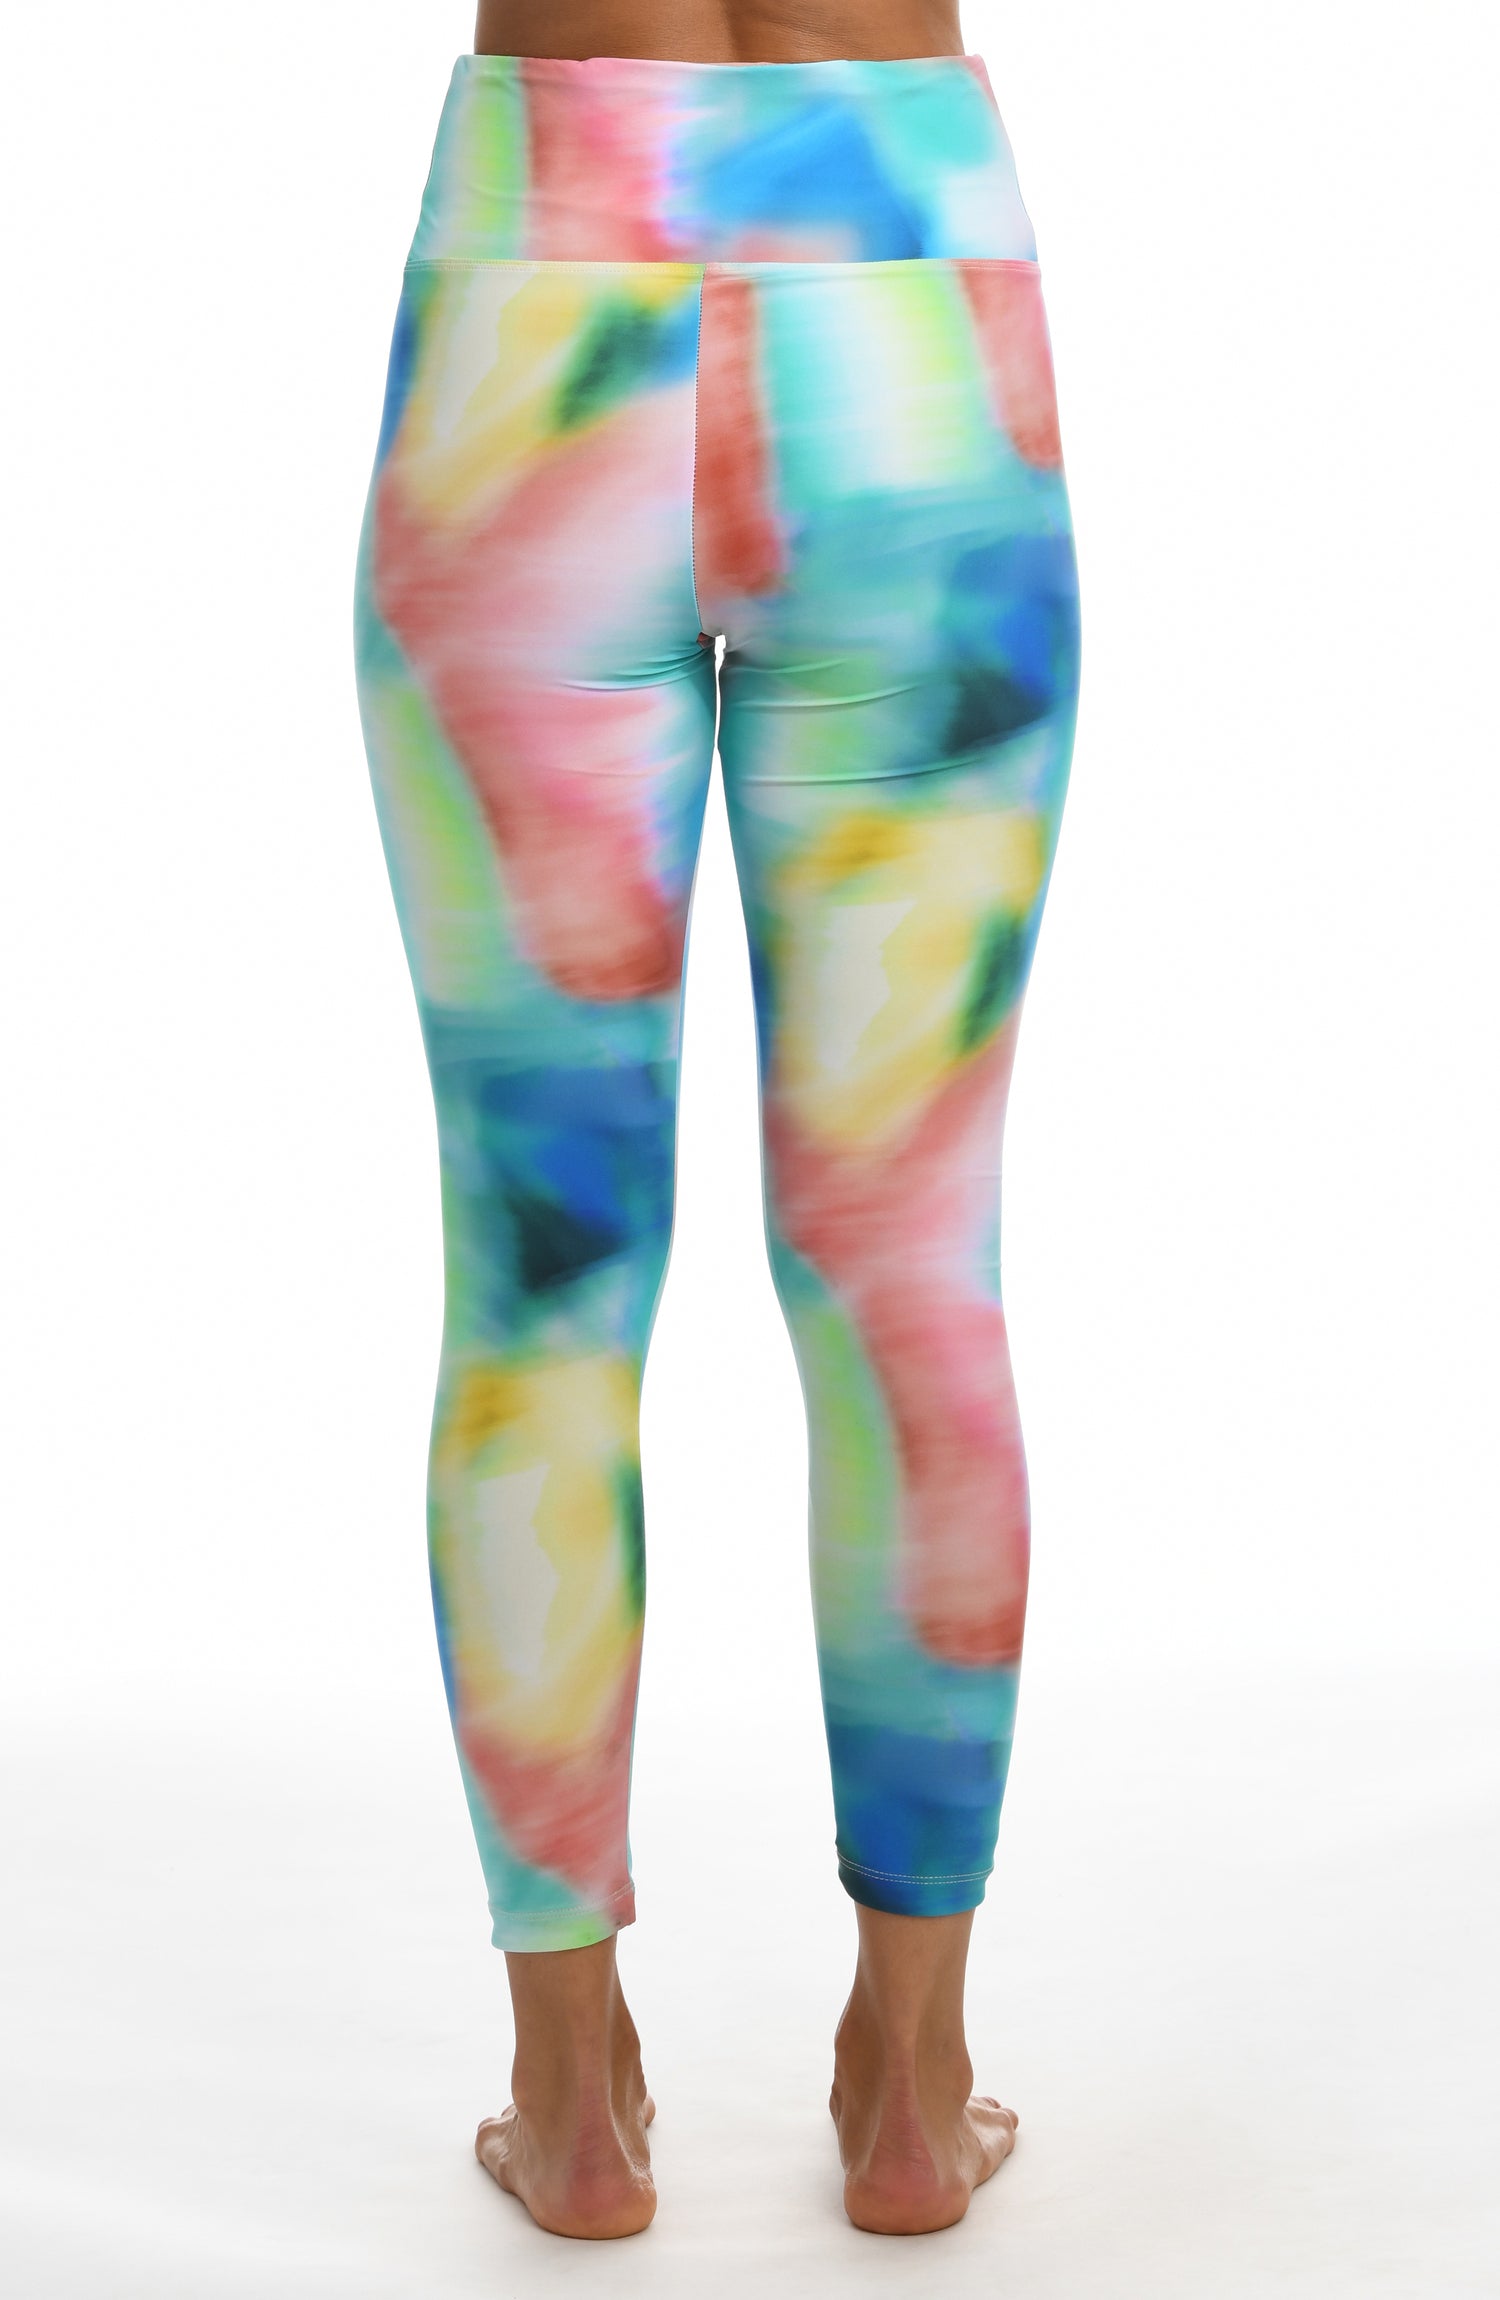 Model is wearing a multi-colored tie-dye inspired high waist legging from our Sunset Tide collection!